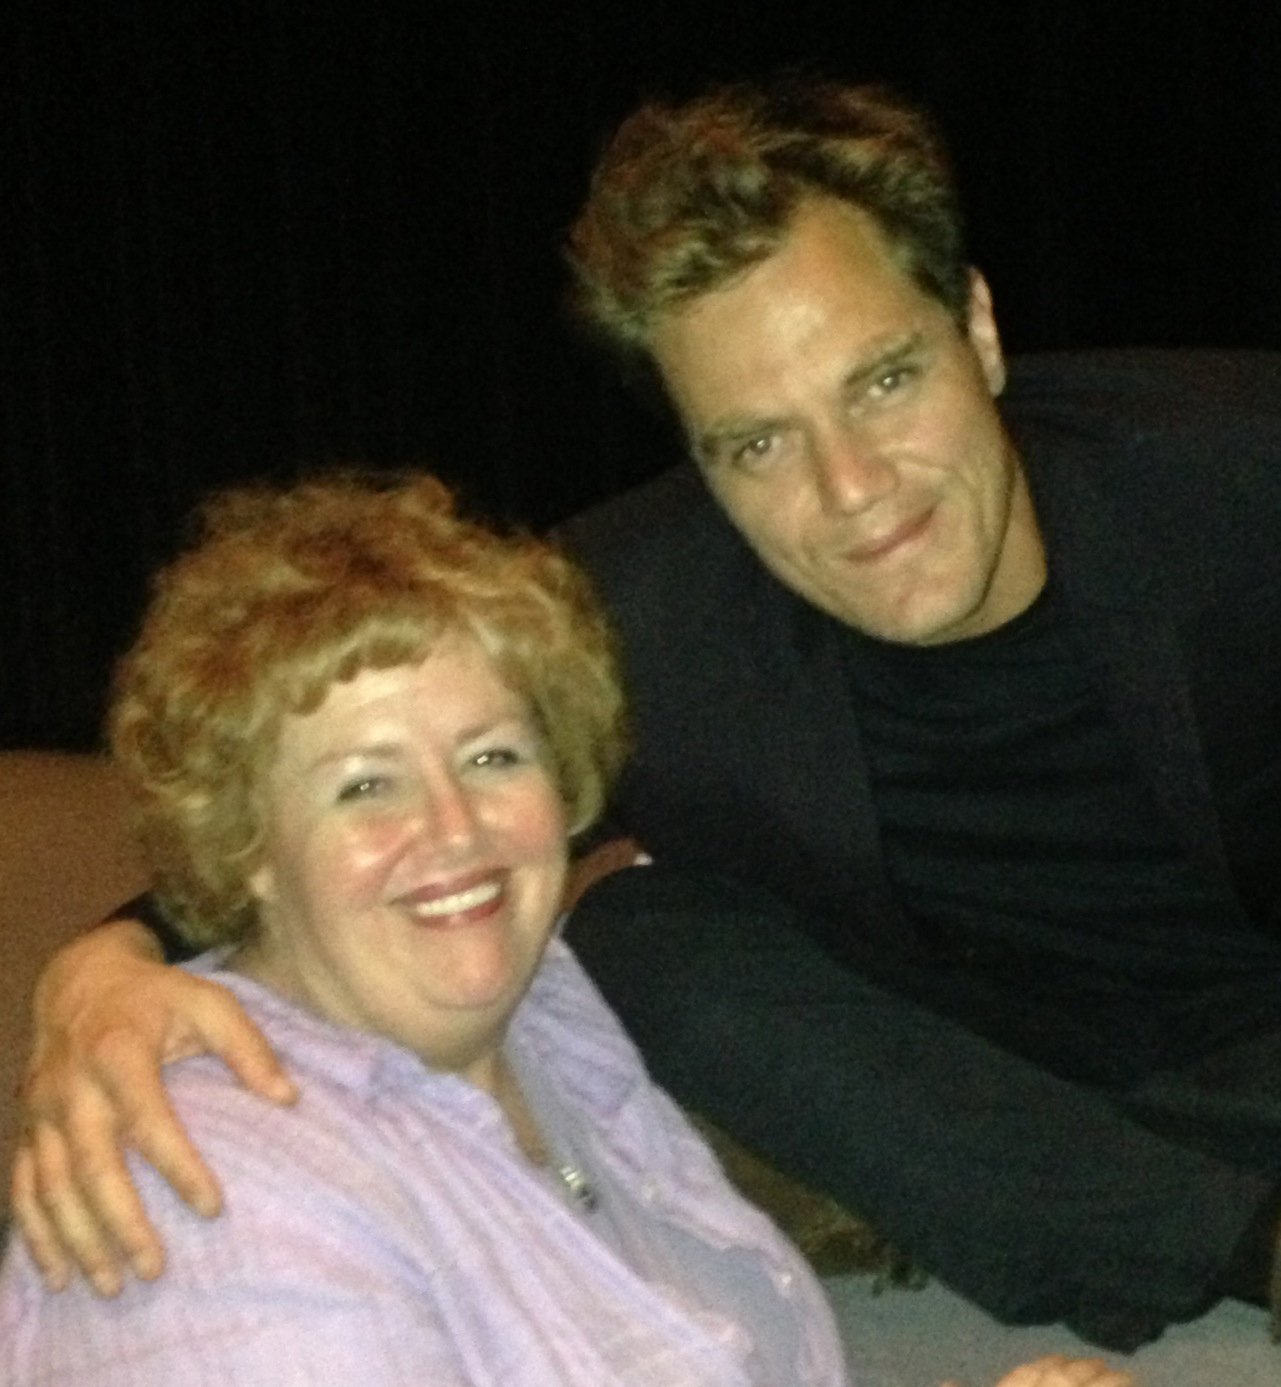 Tracy Weisert & THE ICEMAN Michael Shannon at the film's SAG Premiere April 20, 2013 He is the most kind and classy man!